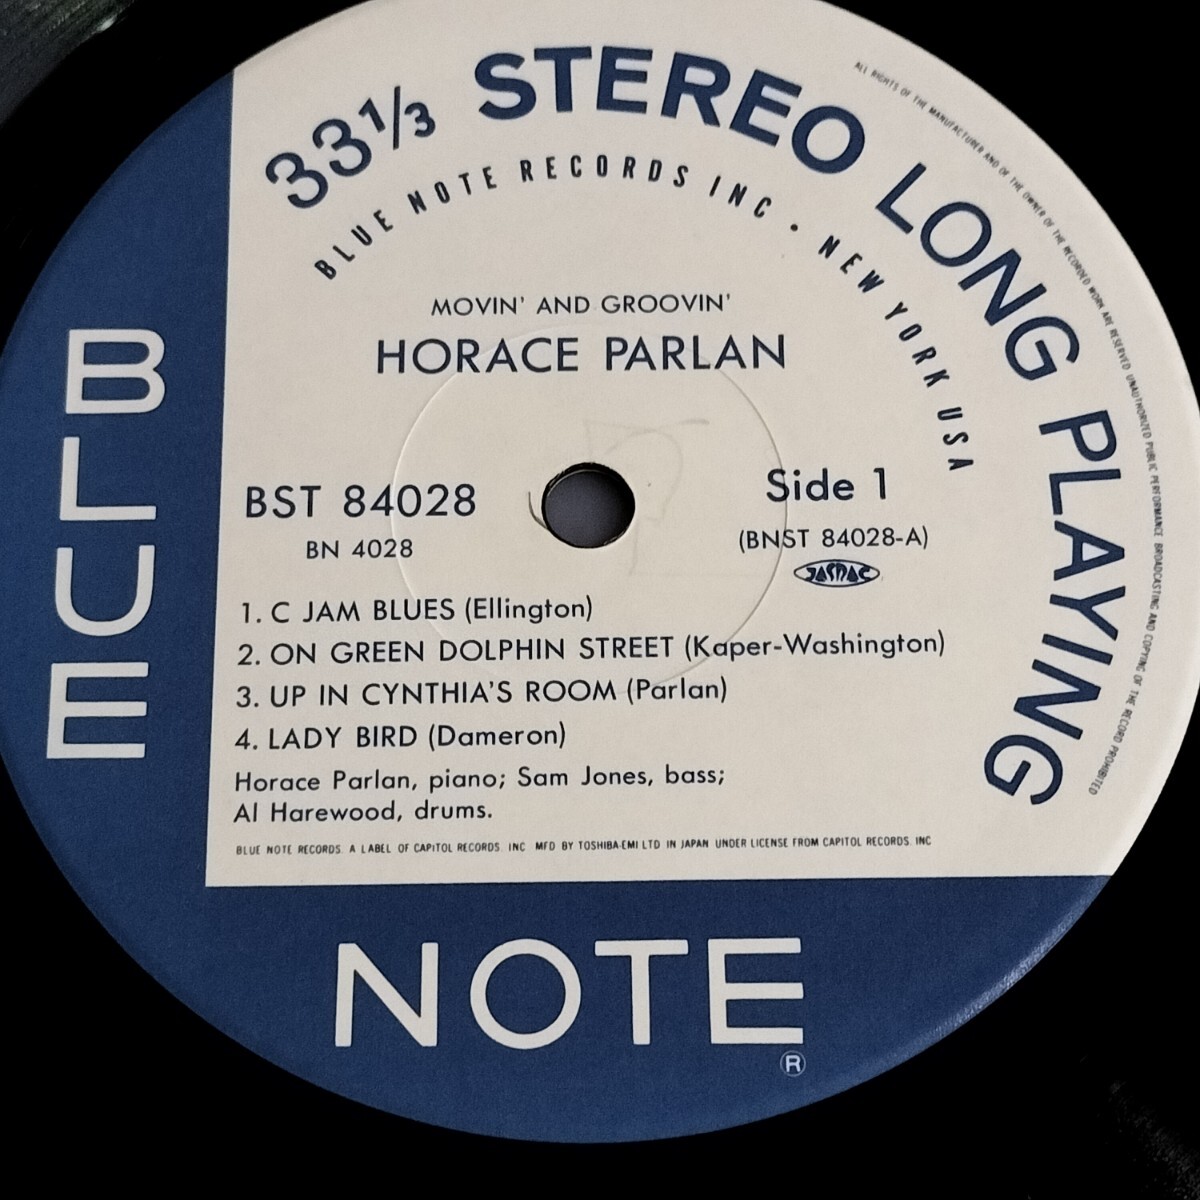 【BN-4028/BST-84028】MOVIN' & GROOVIN' / HORACE PARLAN / BLUE NOTE LP 最後の復刻 / 国内盤 / 帯付き_画像3